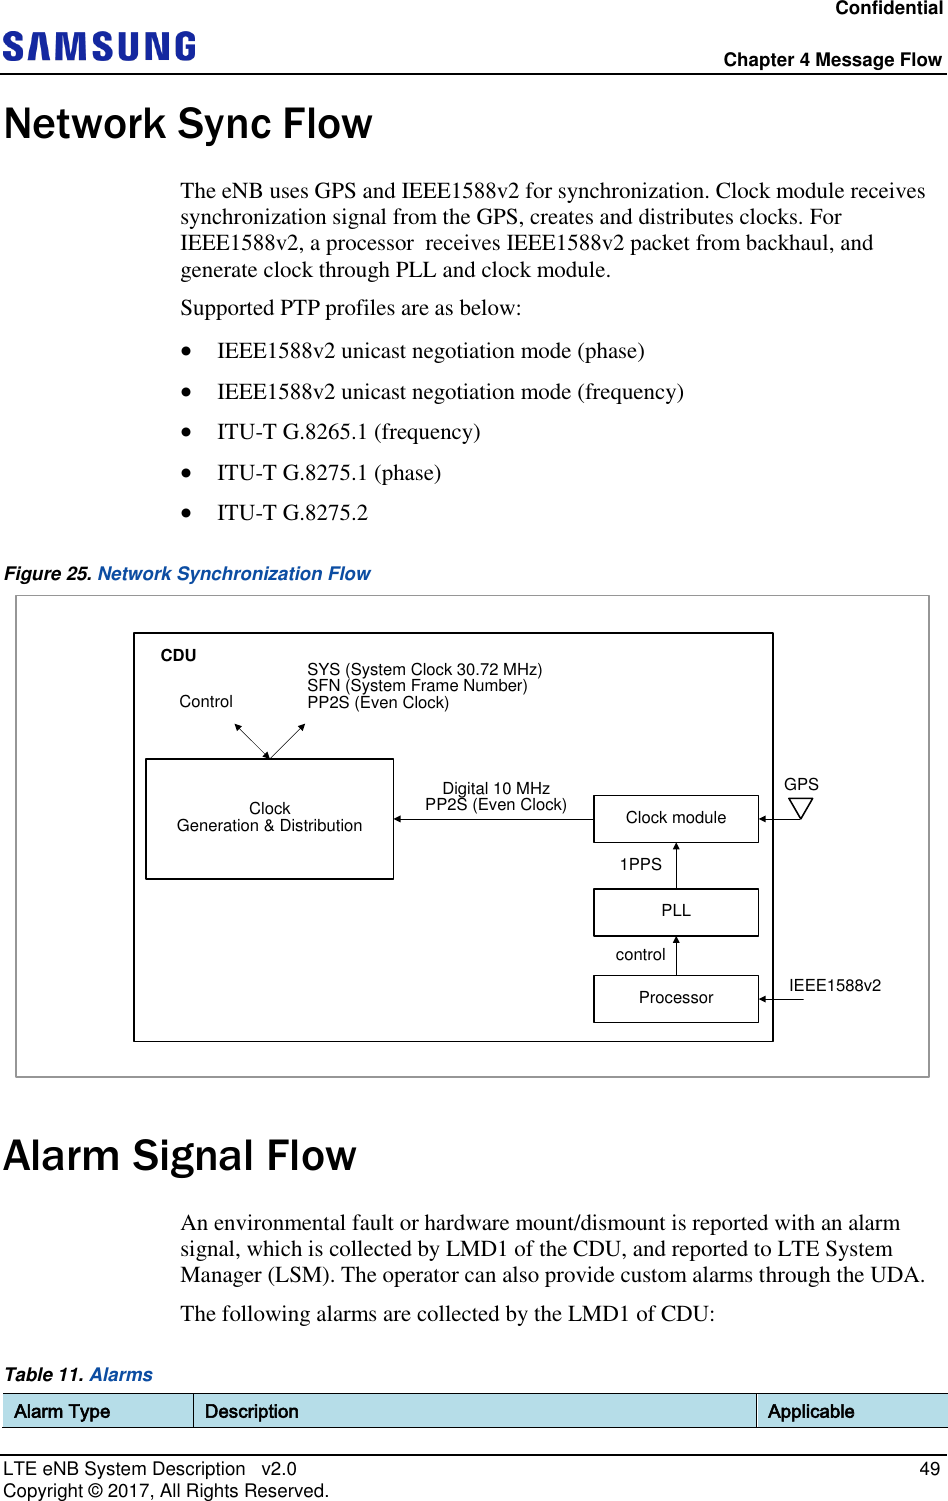 Confidential  Chapter 4 Message Flow LTE eNB System Description   v2.0   49 Copyright ©  2017, All Rights Reserved. Network Sync Flow The eNB uses GPS and IEEE1588v2 for synchronization. Clock module receives synchronization signal from the GPS, creates and distributes clocks. For IEEE1588v2, a processor  receives IEEE1588v2 packet from backhaul, and generate clock through PLL and clock module. Supported PTP profiles are as below:  IEEE1588v2 unicast negotiation mode (phase)  IEEE1588v2 unicast negotiation mode (frequency)  ITU-T G.8265.1 (frequency)  ITU-T G.8275.1 (phase)  ITU-T G.8275.2 Figure 25. Network Synchronization Flow ClockGeneration &amp; Distribution Clock moduleCDUGPSControlSYS (System Clock 30.72 MHz)SFN (System Frame Number)PP2S (Even Clock)Digital 10 MHzPP2S (Even Clock)Processor IEEE1588v2PLLcontrol1PPS Alarm Signal Flow An environmental fault or hardware mount/dismount is reported with an alarm signal, which is collected by LMD1 of the CDU, and reported to LTE System Manager (LSM). The operator can also provide custom alarms through the UDA. The following alarms are collected by the LMD1 of CDU: Table 11. Alarms Alarm Type Description Applicable 